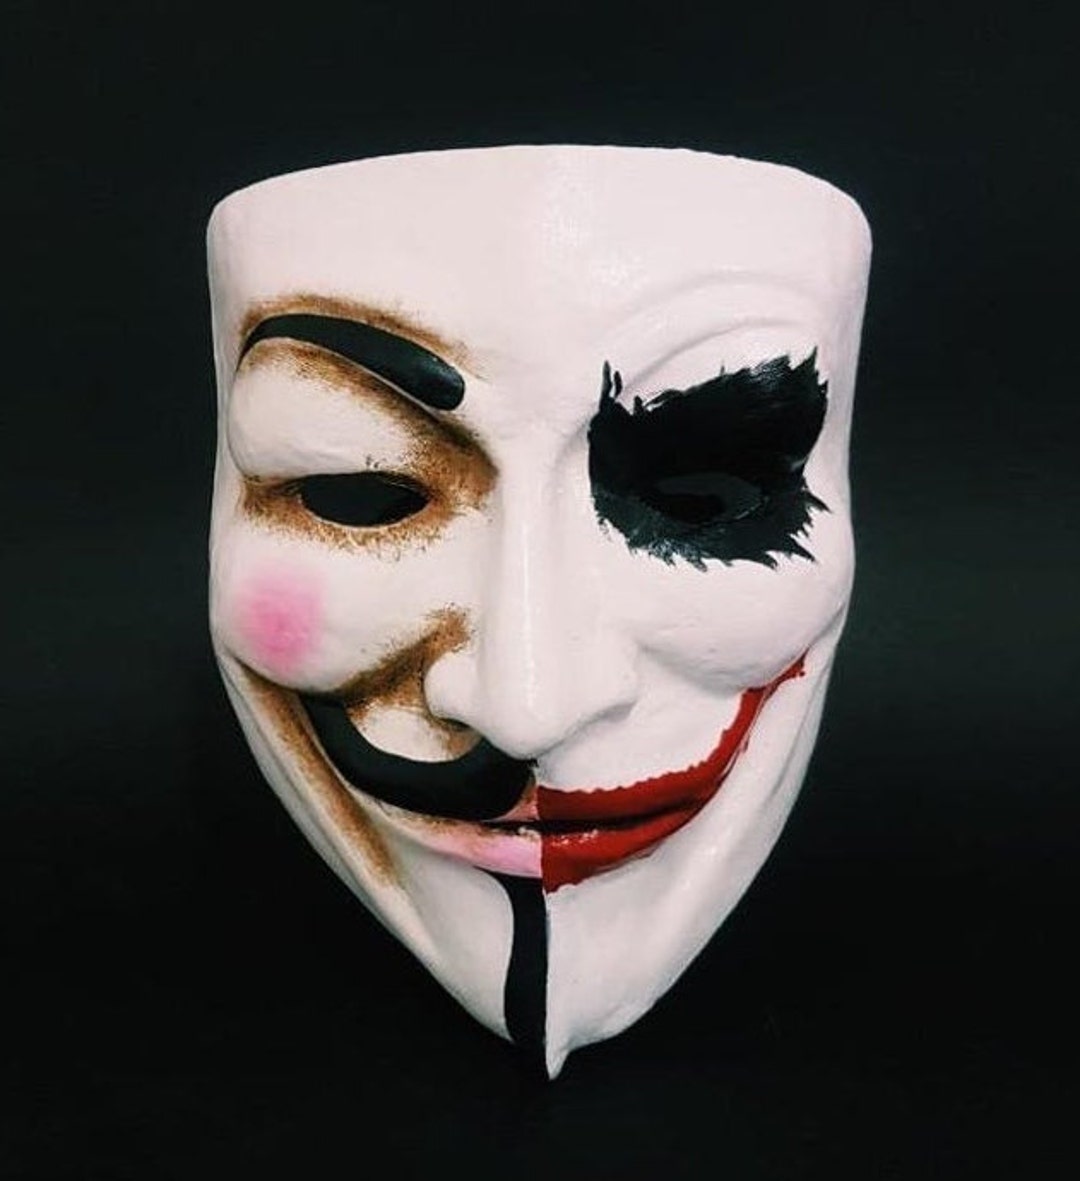 guy fawkes day mask anonymous mask guy fawkes mask v for vendetta